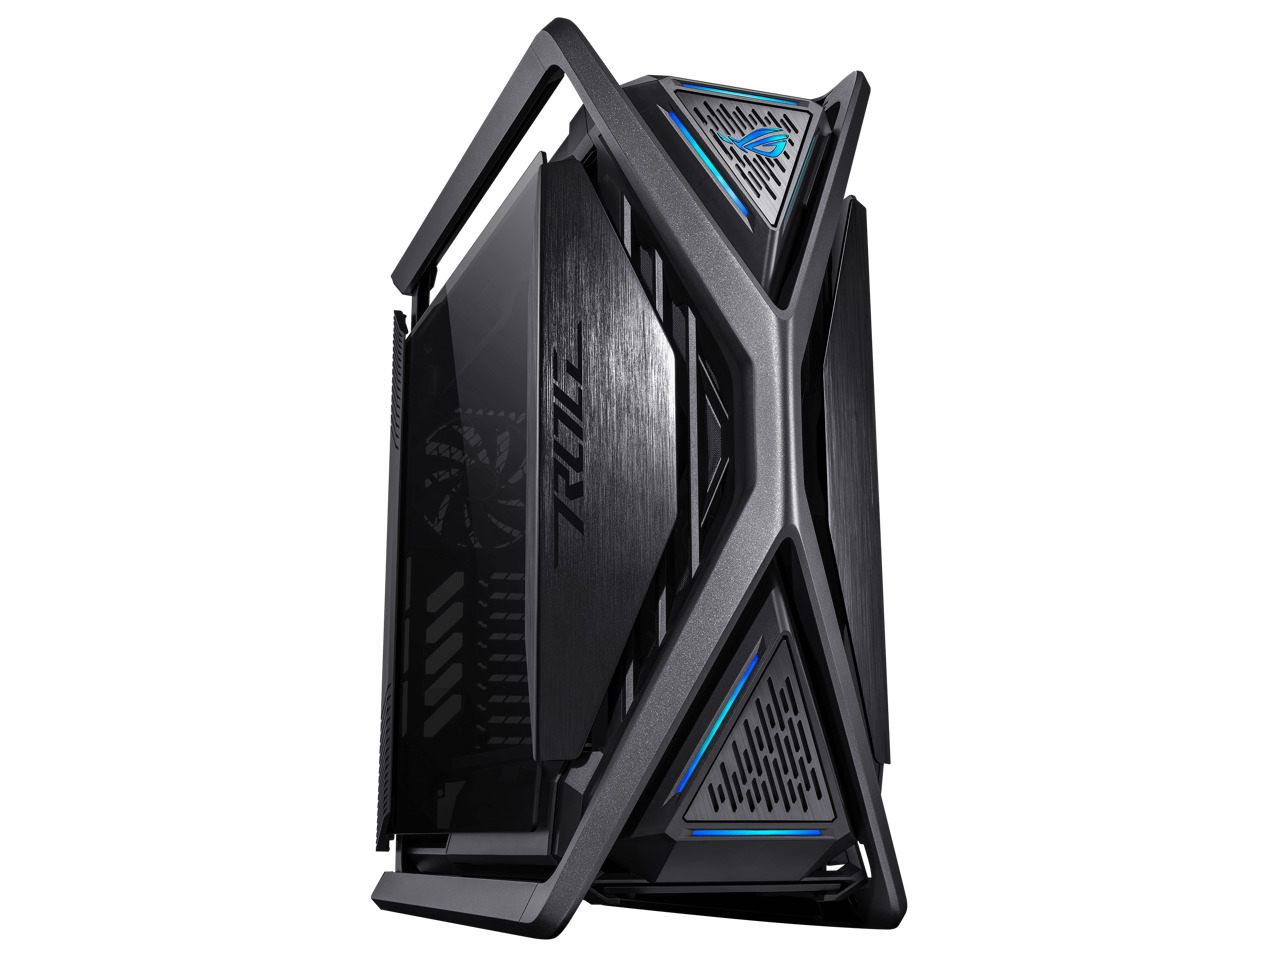 ASUS ROG Hyperion GR701 EATX full-tower computer case with semi-open structure,